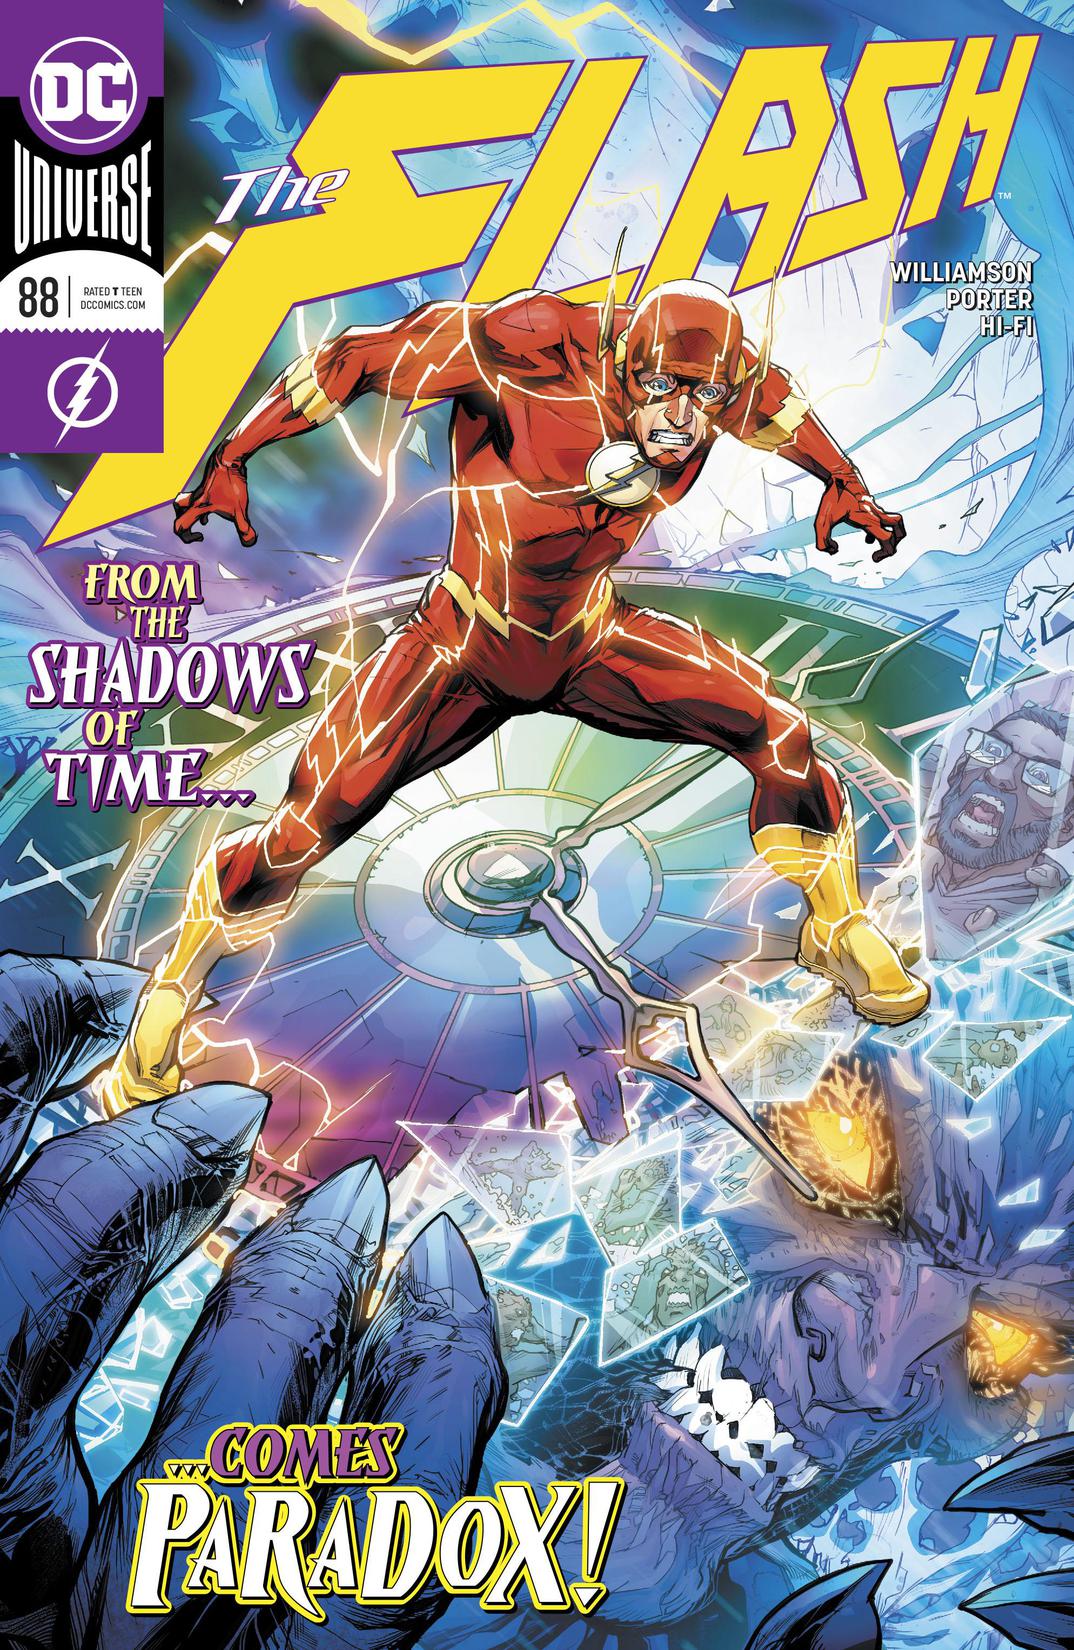 The Flash (2016-) #88 preview images